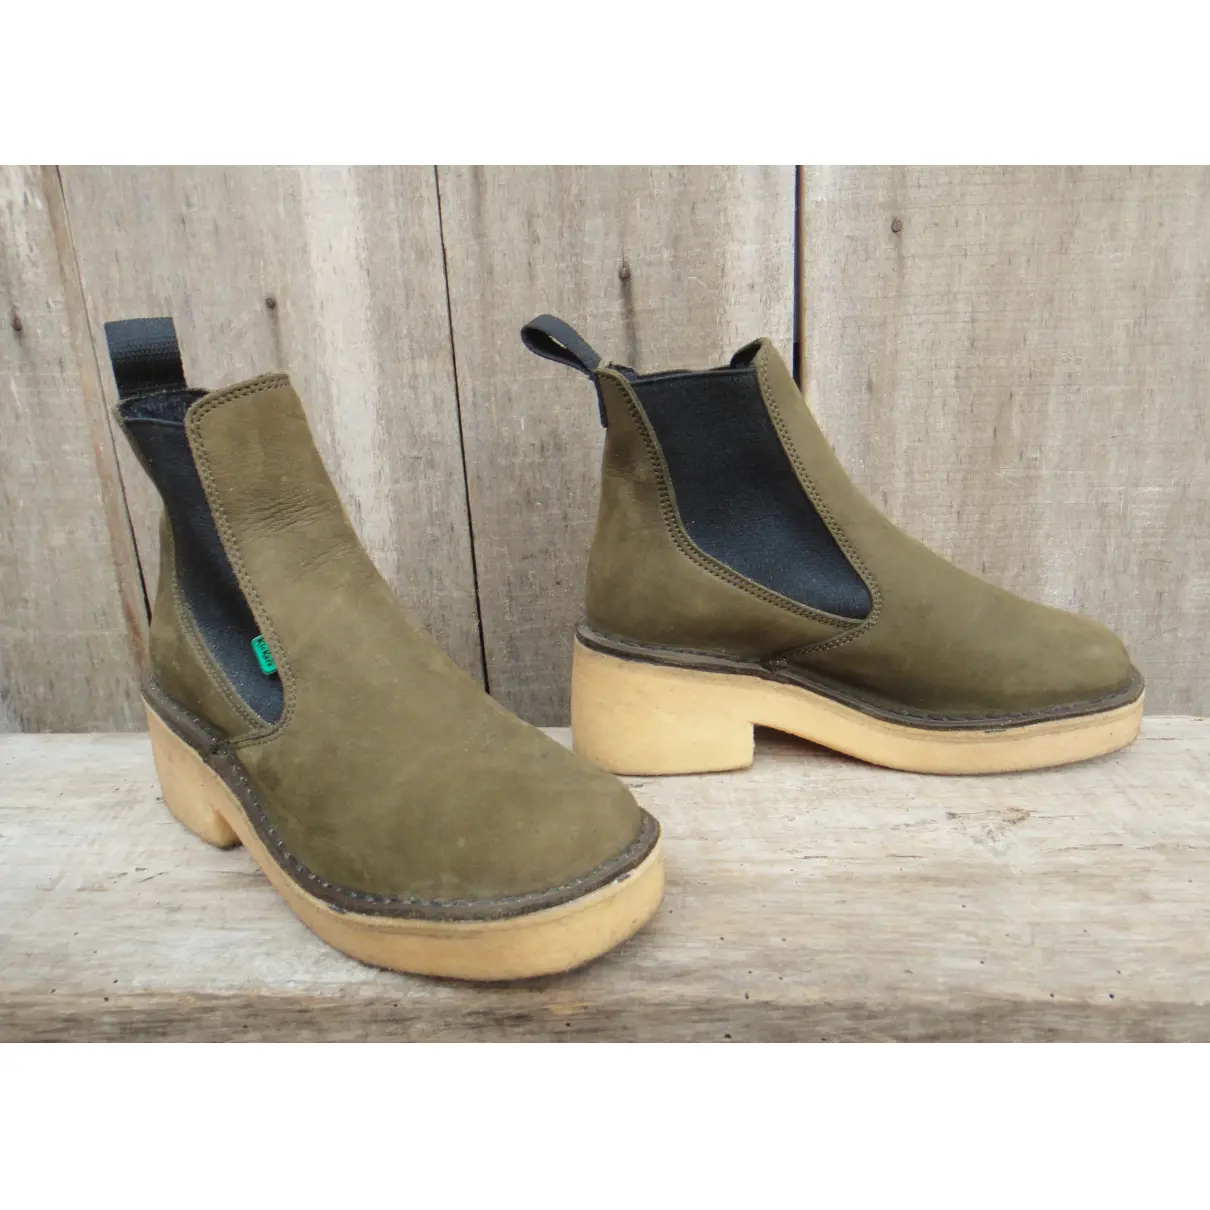 Buy KICKERS Ankle boots online